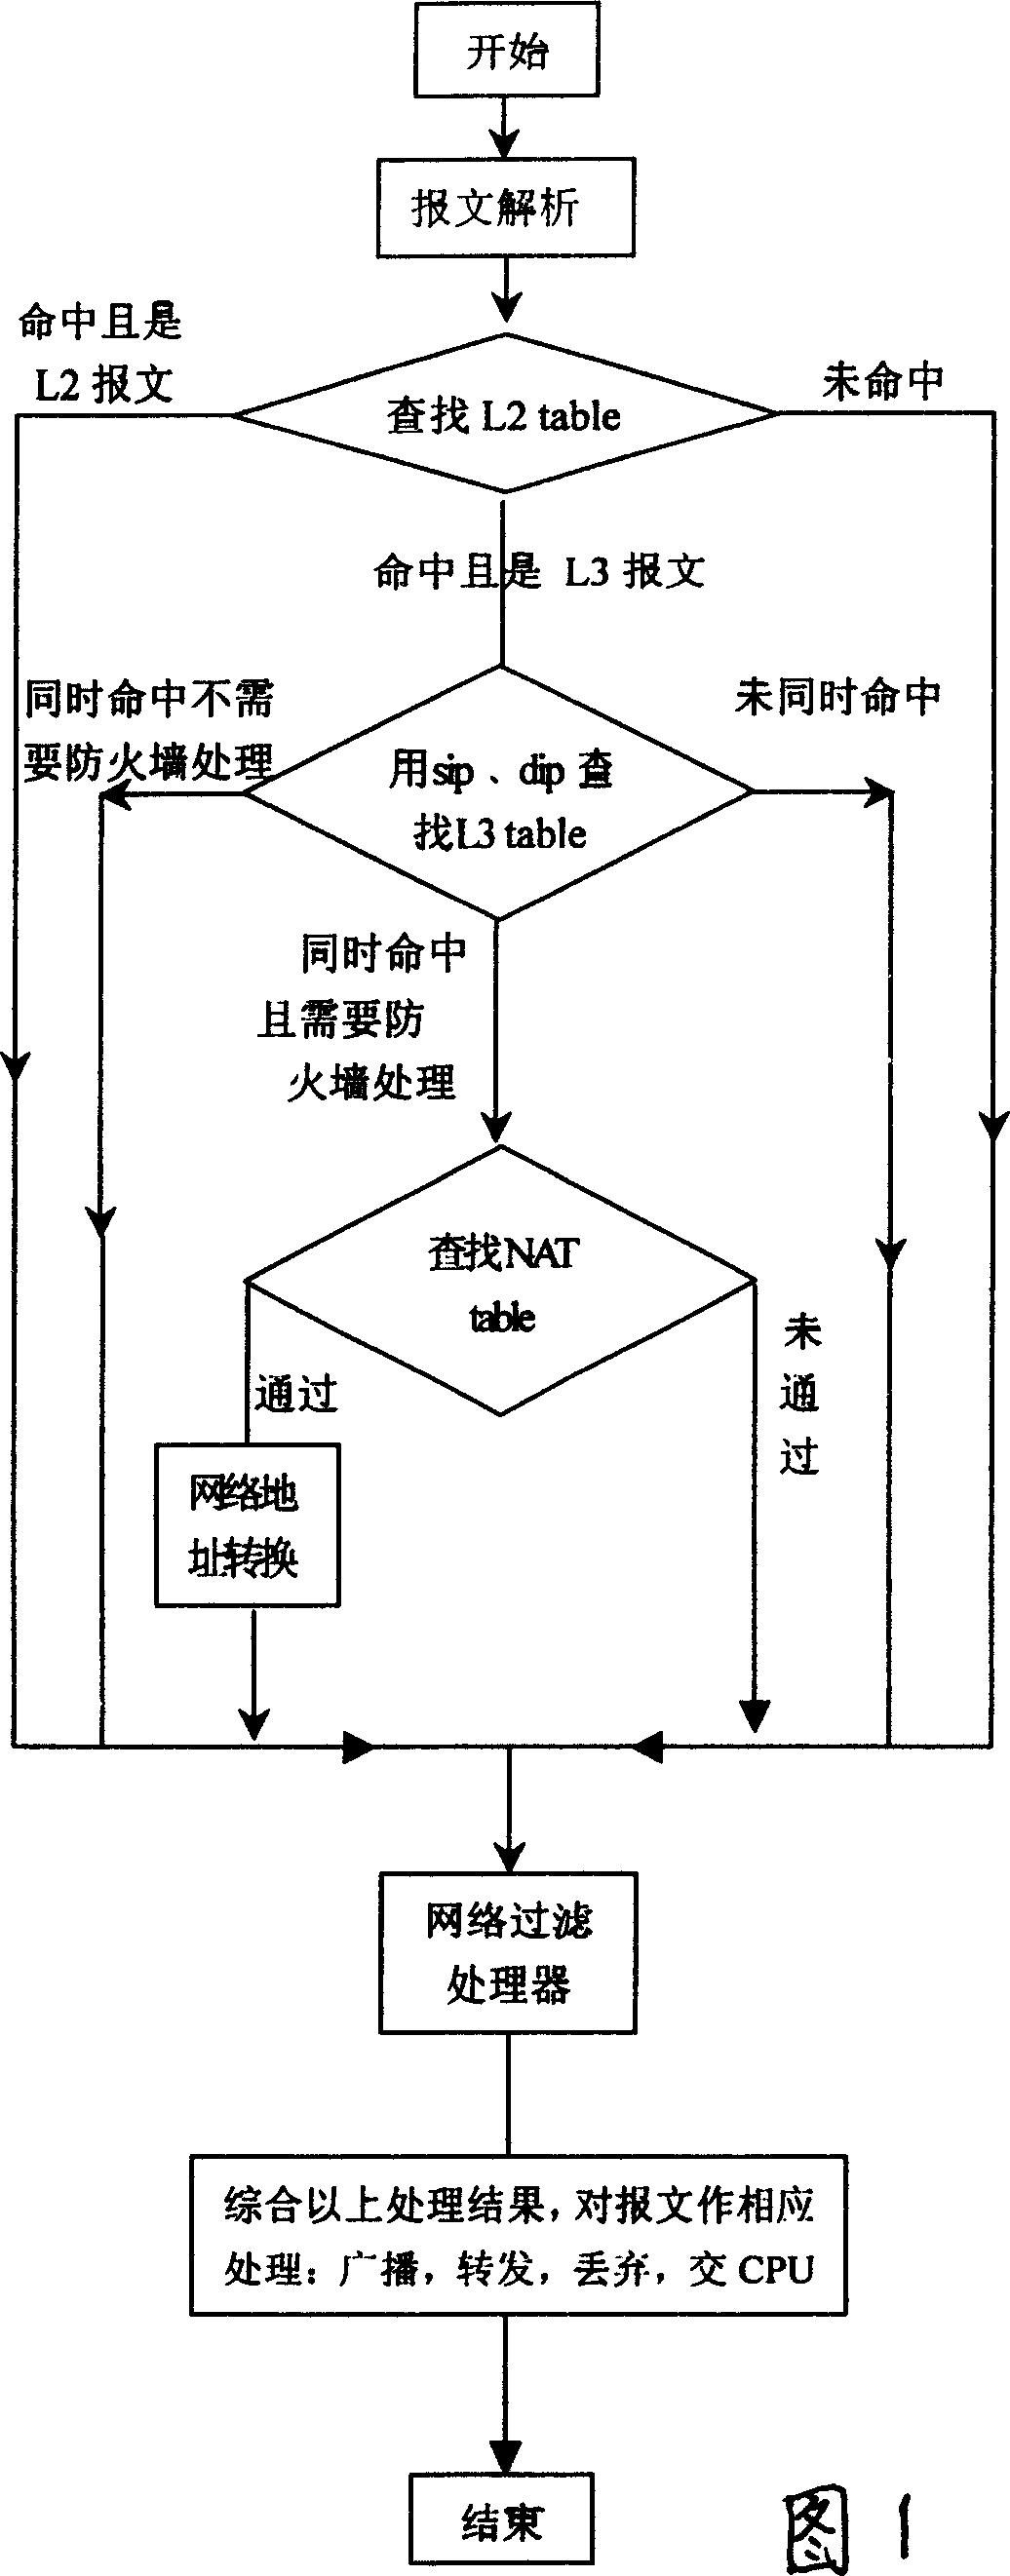 Method for simultaneously implementing layer 2 switching, layer 3 routing, data content filtering, and firewall function in one same chip